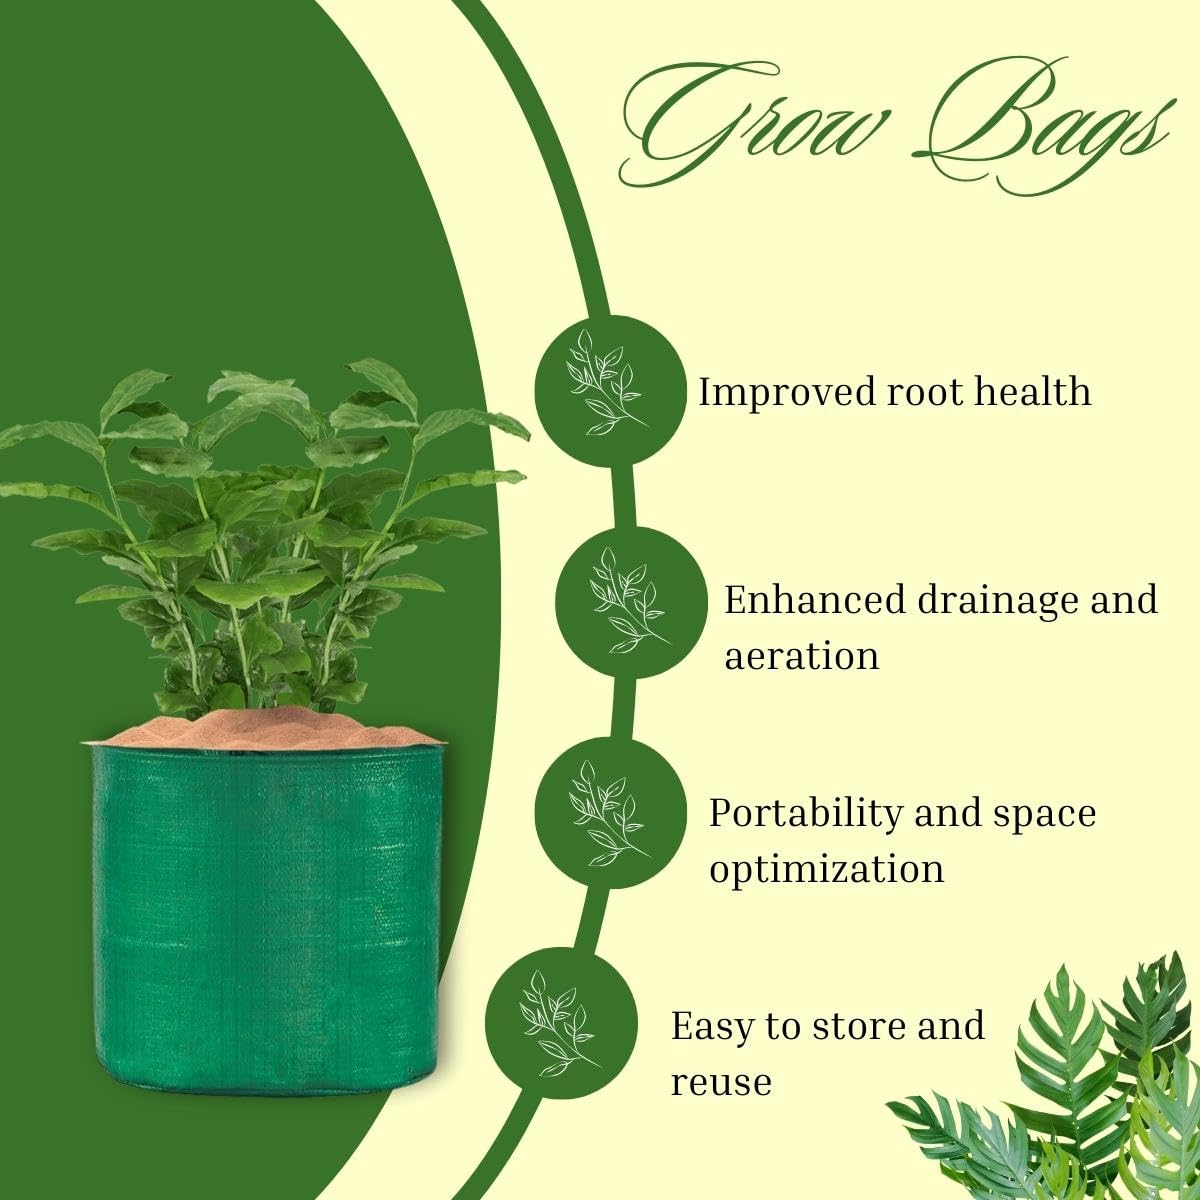 SINGHAL HDPE UV Protected Grow Bags 15 x 12 inches, Pack of 4 for Terrace and Vegetable Gardening